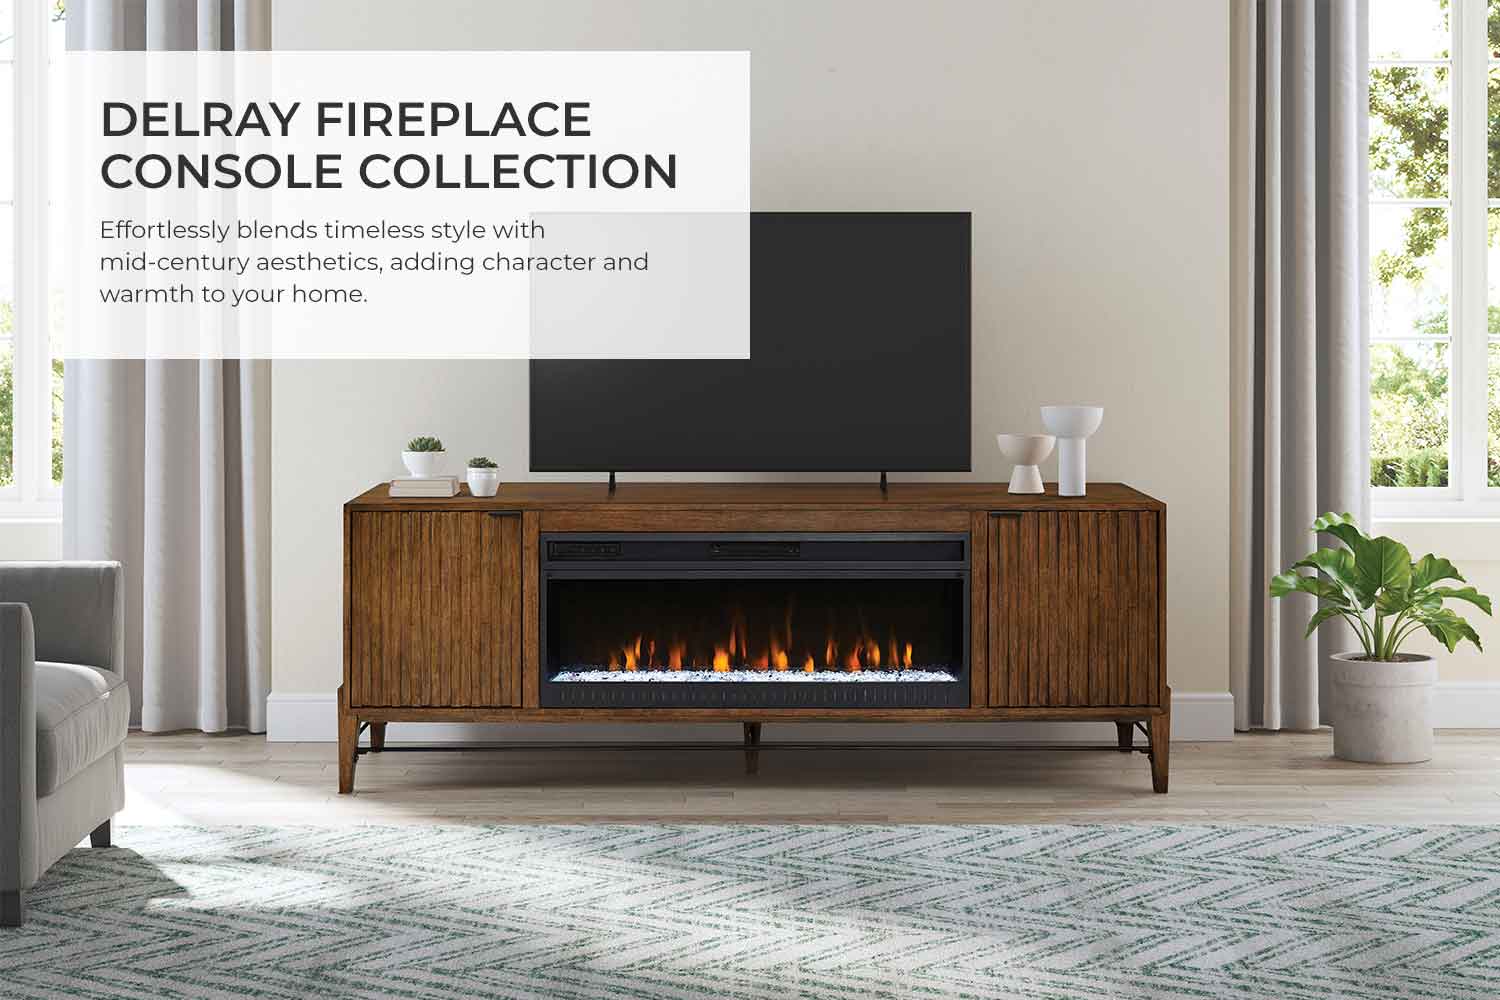 Delray Fireplace Console Collection